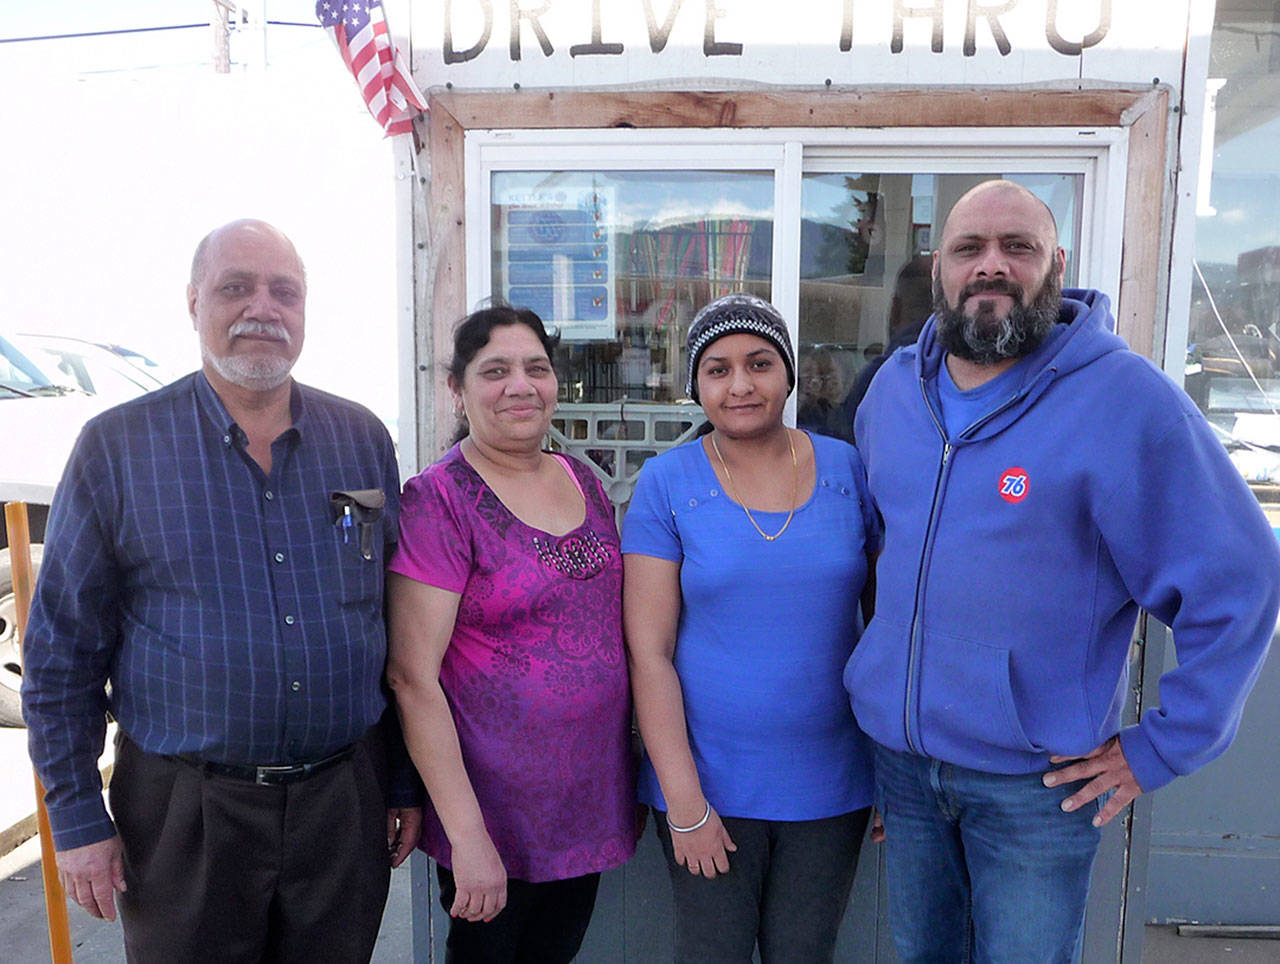 Ready to serve you at Kettel’s 76 are members of the Khela family: From left, Singh, Ramesh, Raman and Hap. Sequim Gazette photo by Patricia Morrison Coate